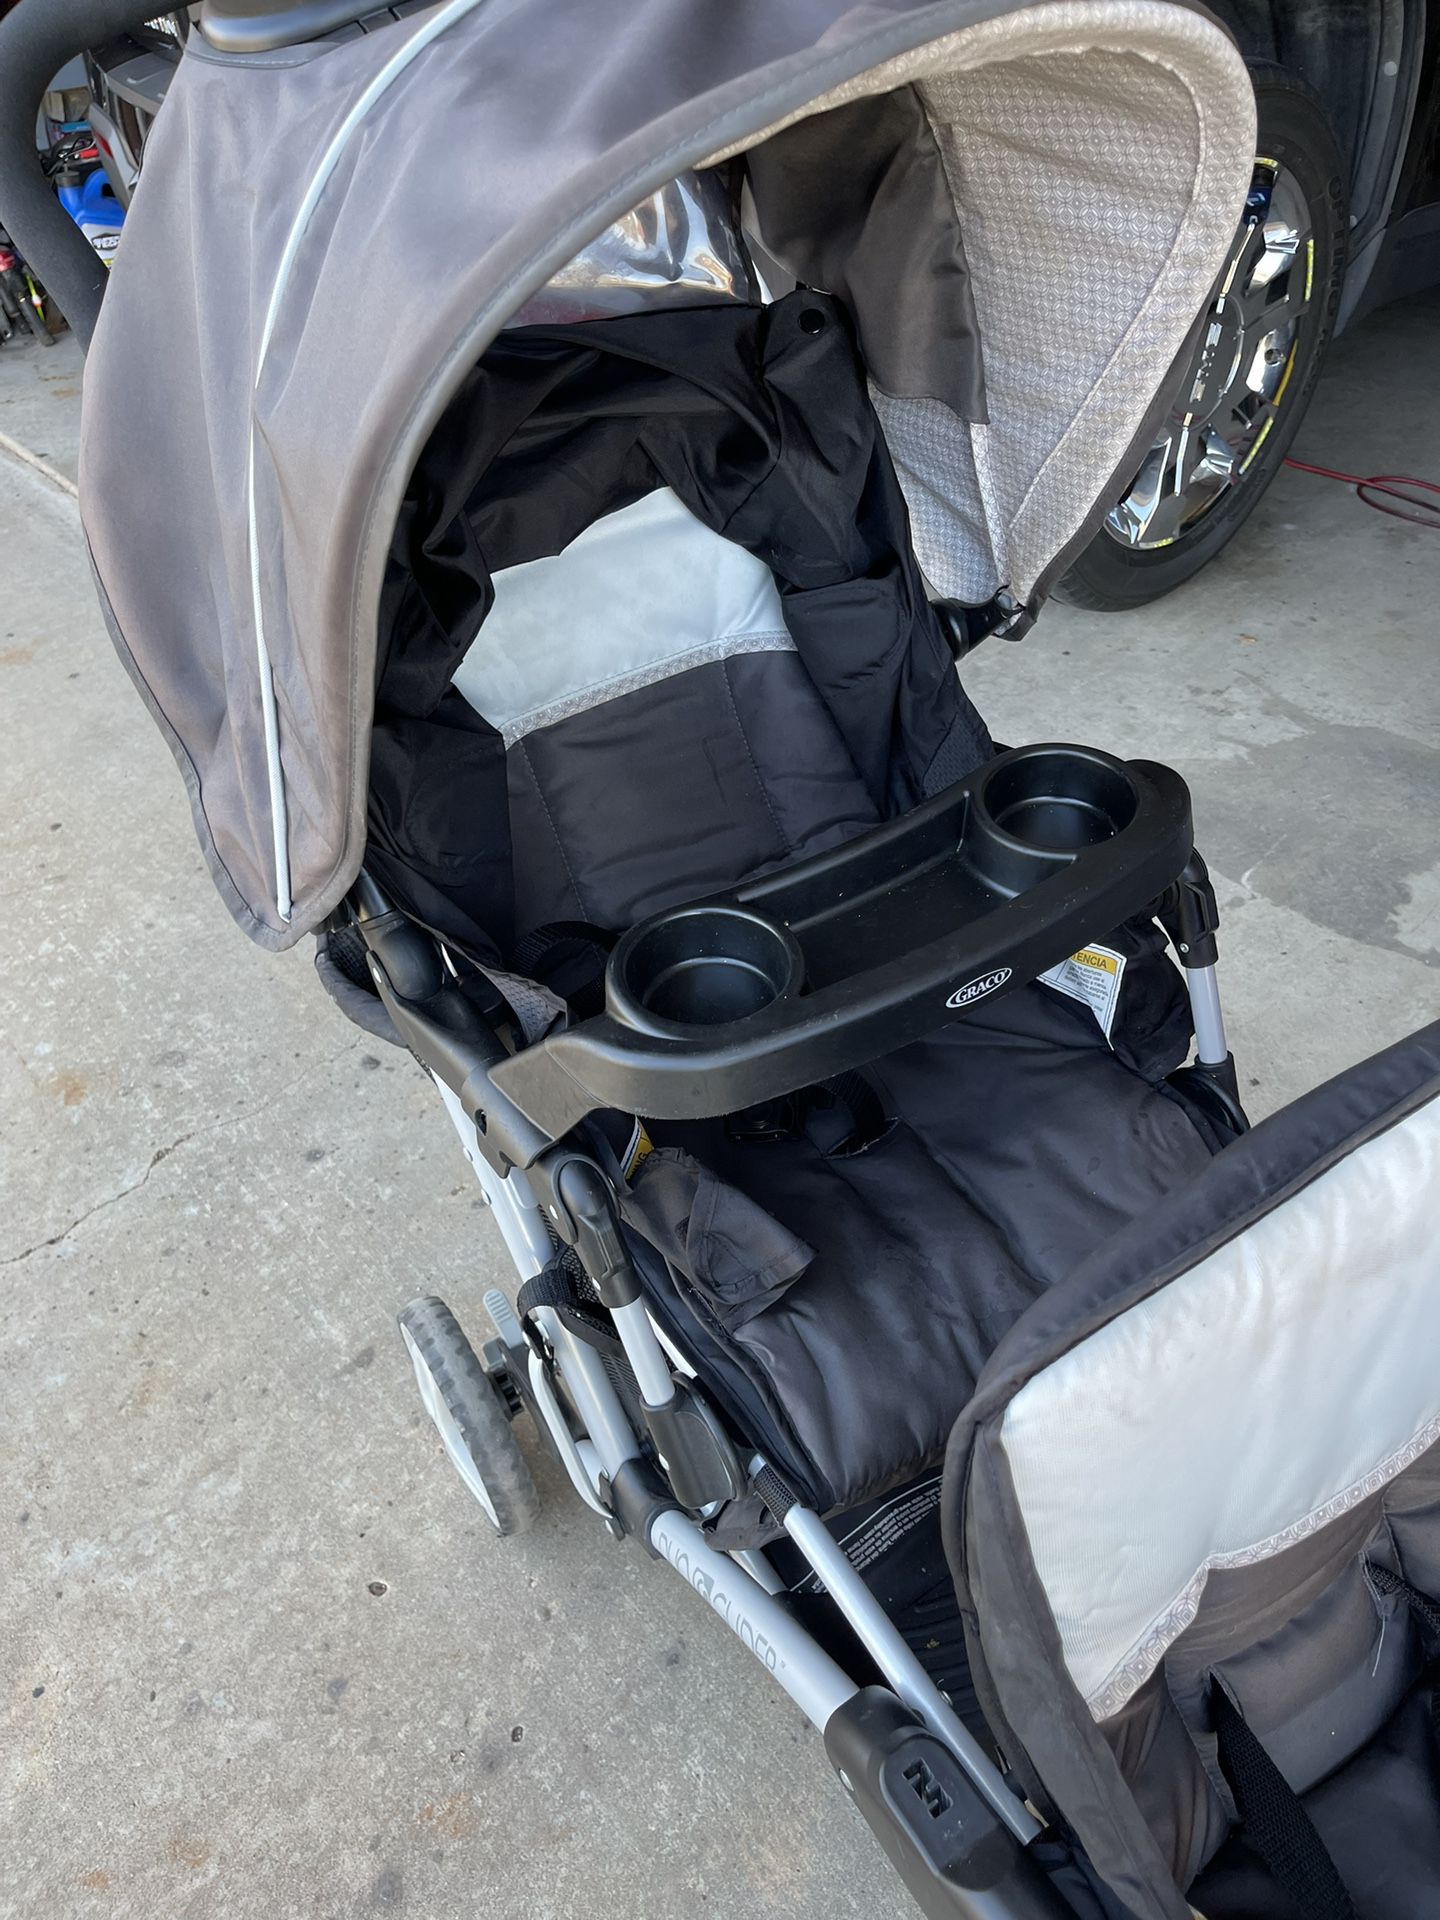 Graco Duo Double Stroller (donated to Goodwill)